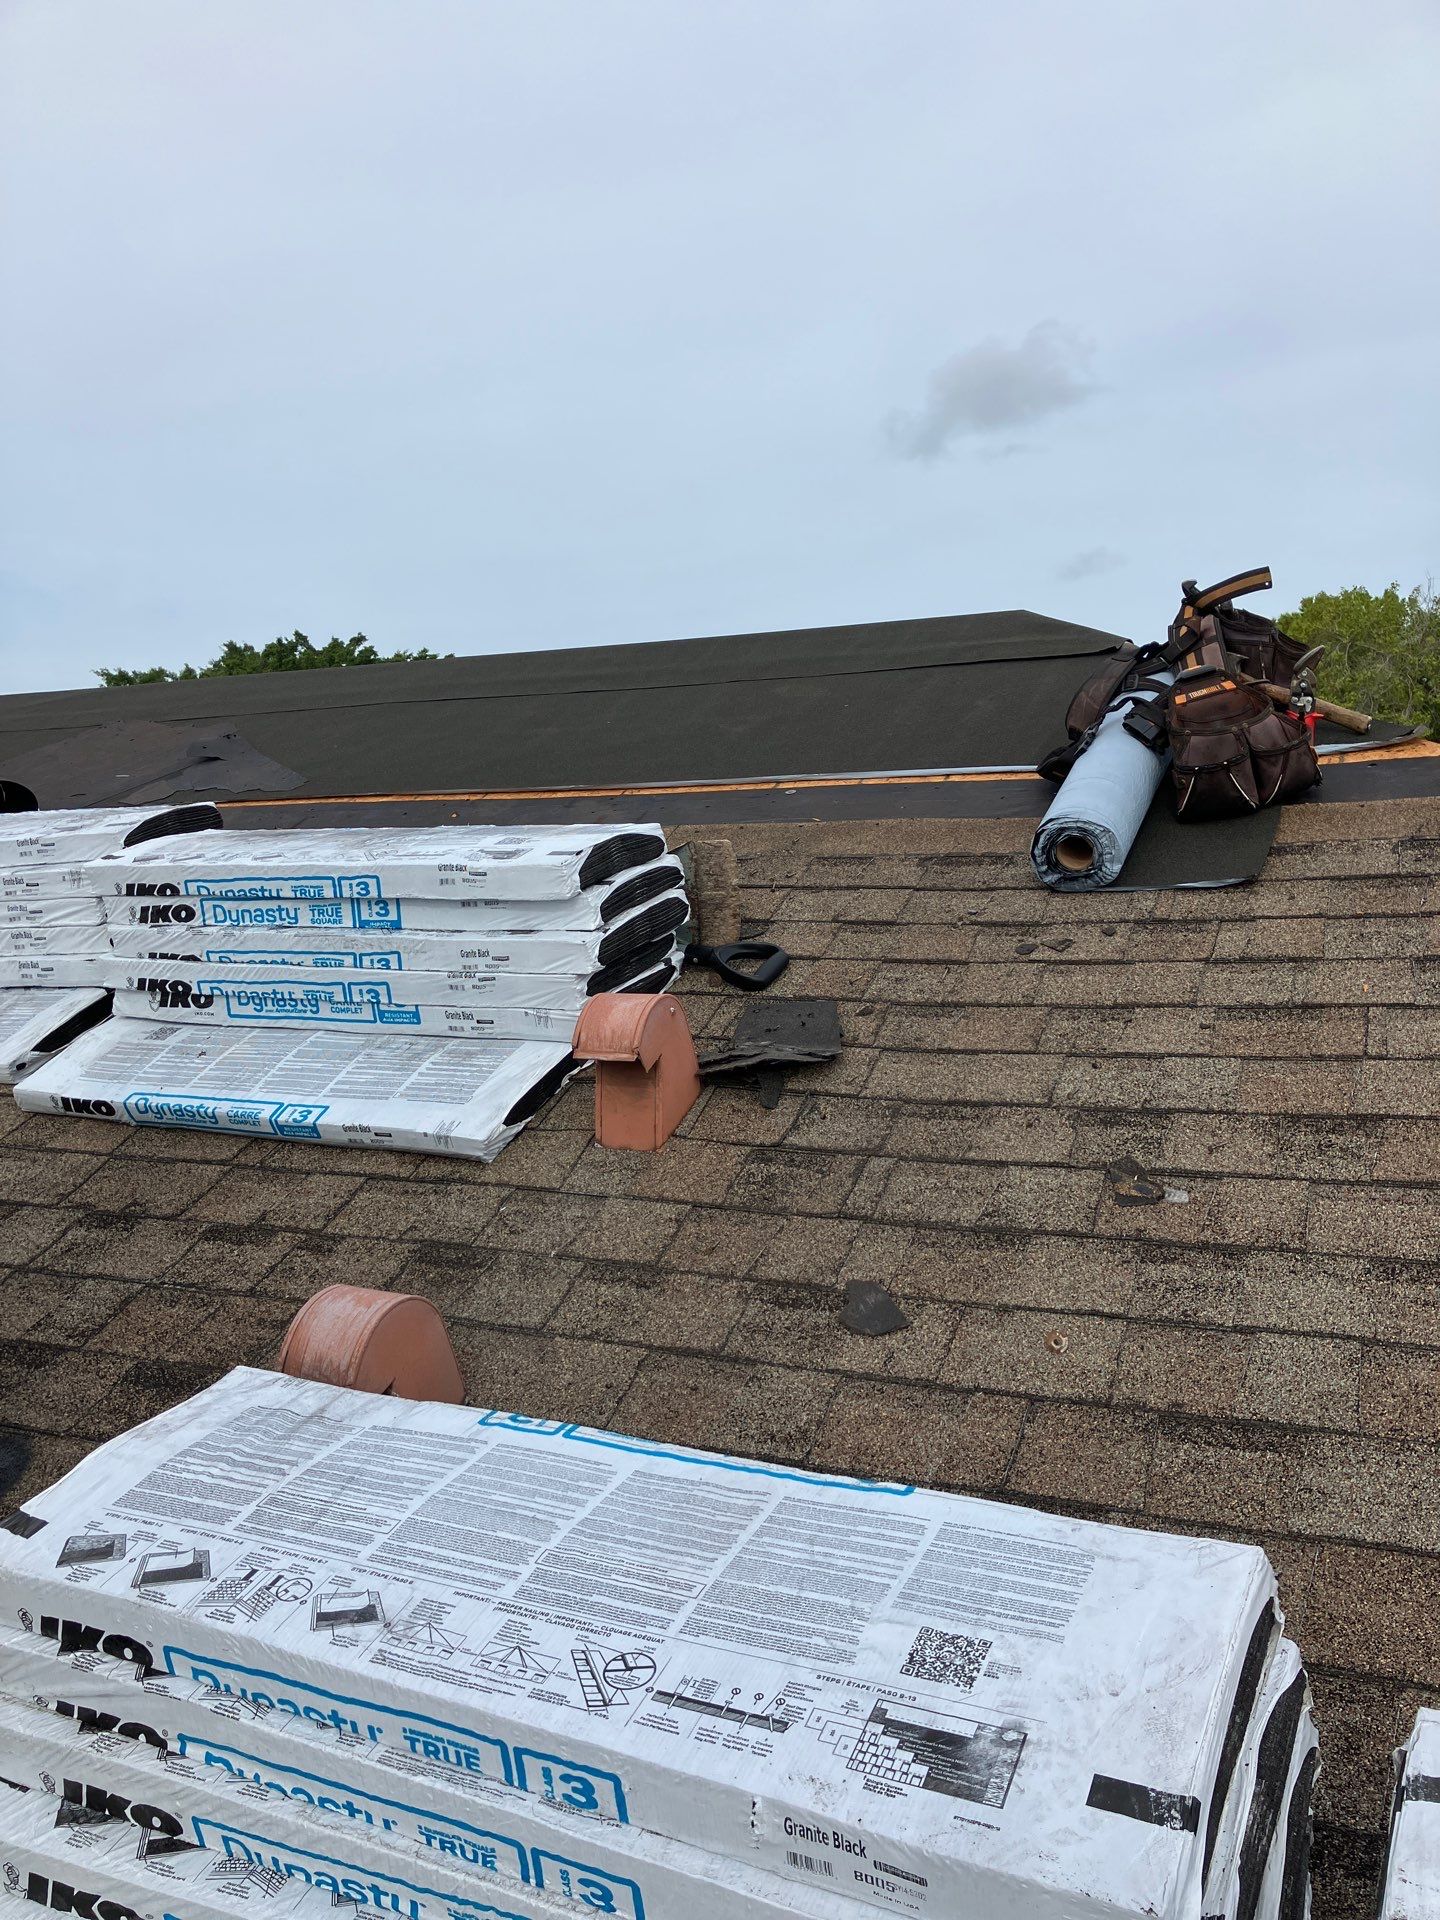 home roofing